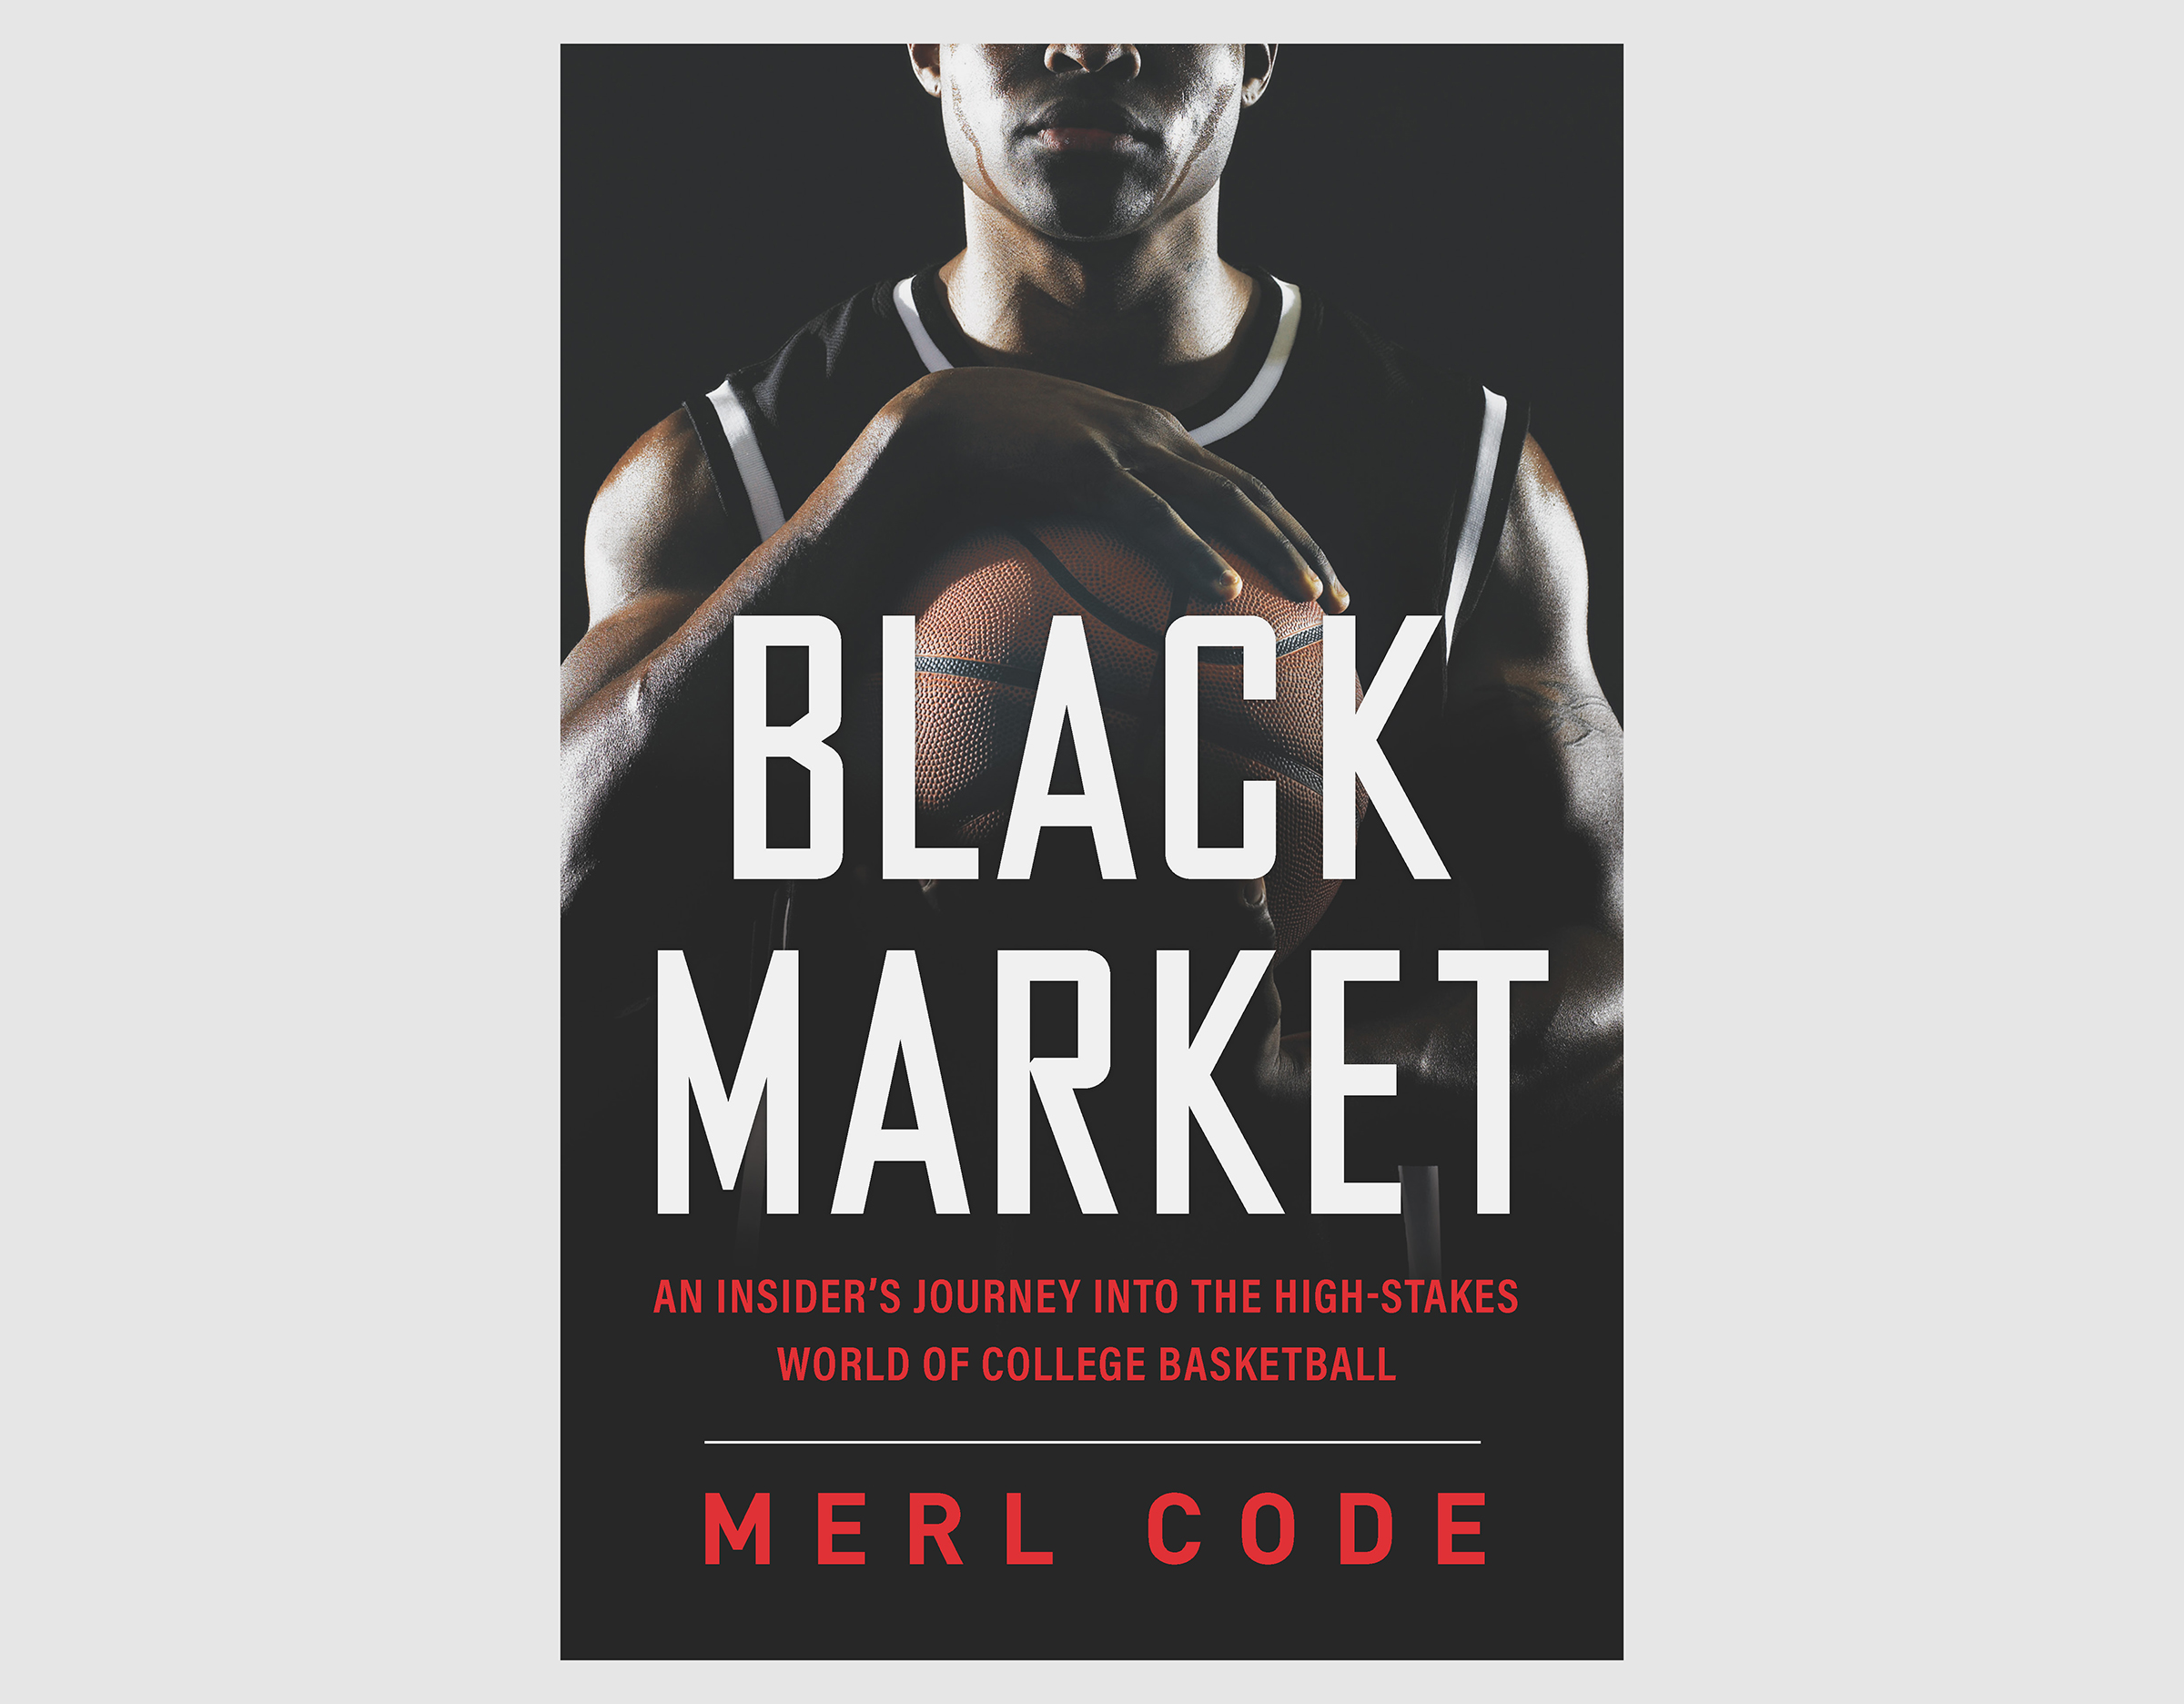 The book jacket for Black Market: “An Insider’s Journey into the High-Stakes World of College Basketball.”